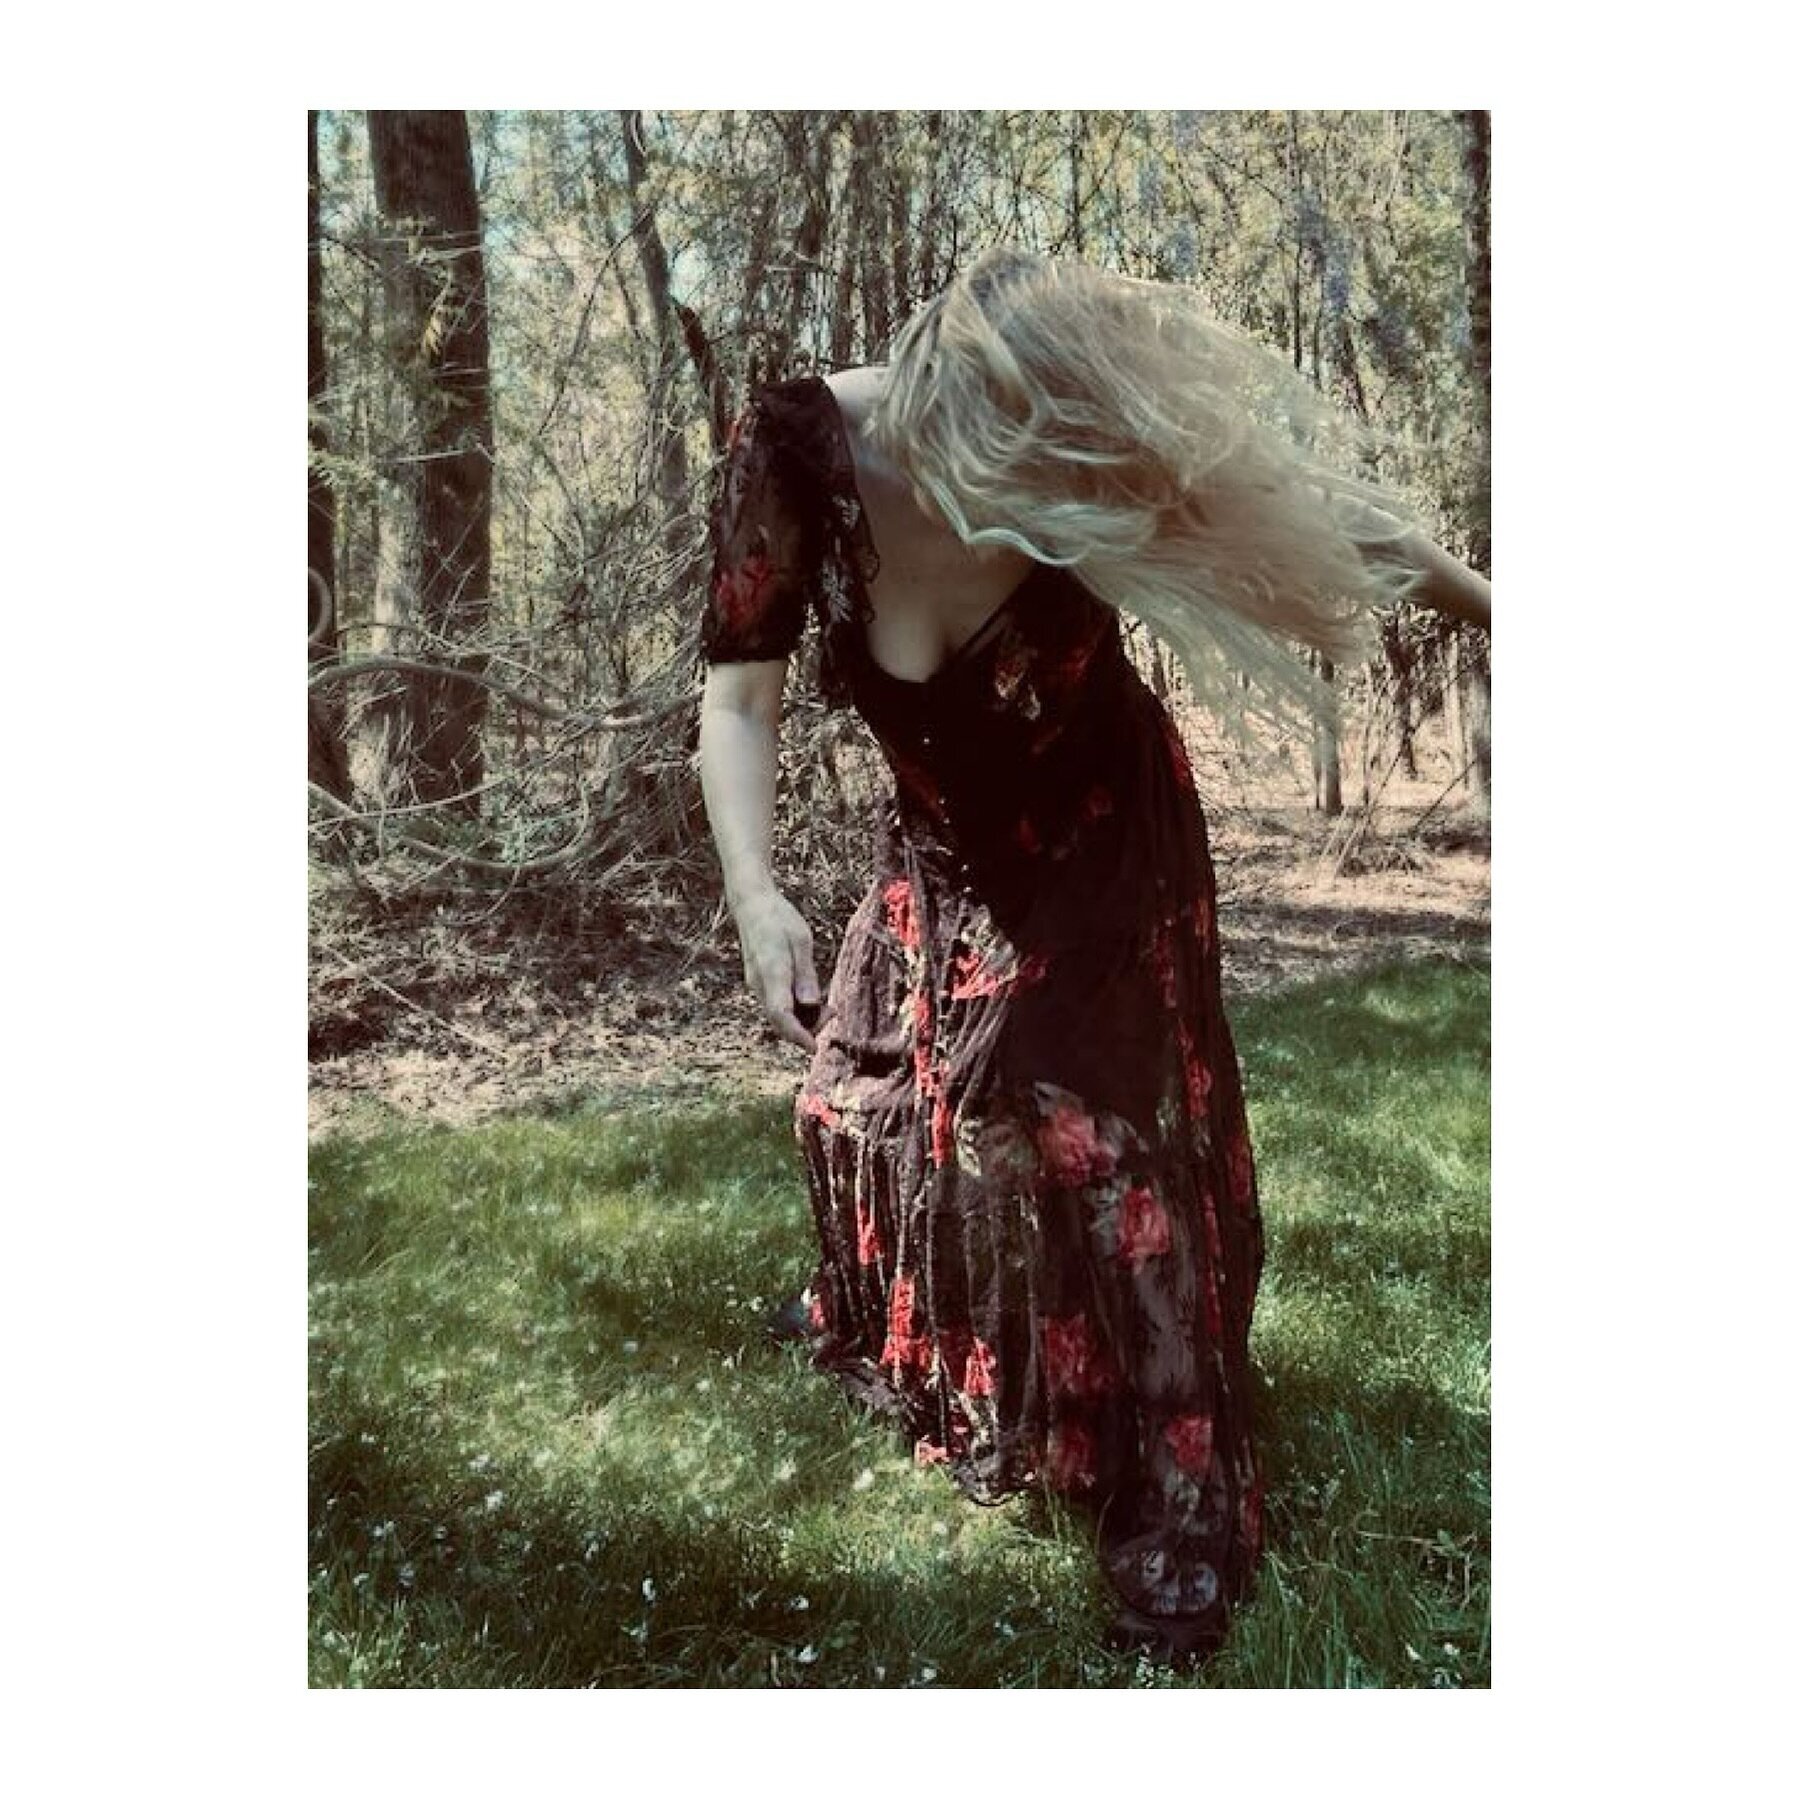 I took a bunch of self-portraits today for a project I may or may not do. I made a reel of my favs that is in my story. I knew this Free People dress would come in handy for this 😍-
&bull;
&bull;
&bull;
#selfportrait #autoportrait #carrboro #thisism